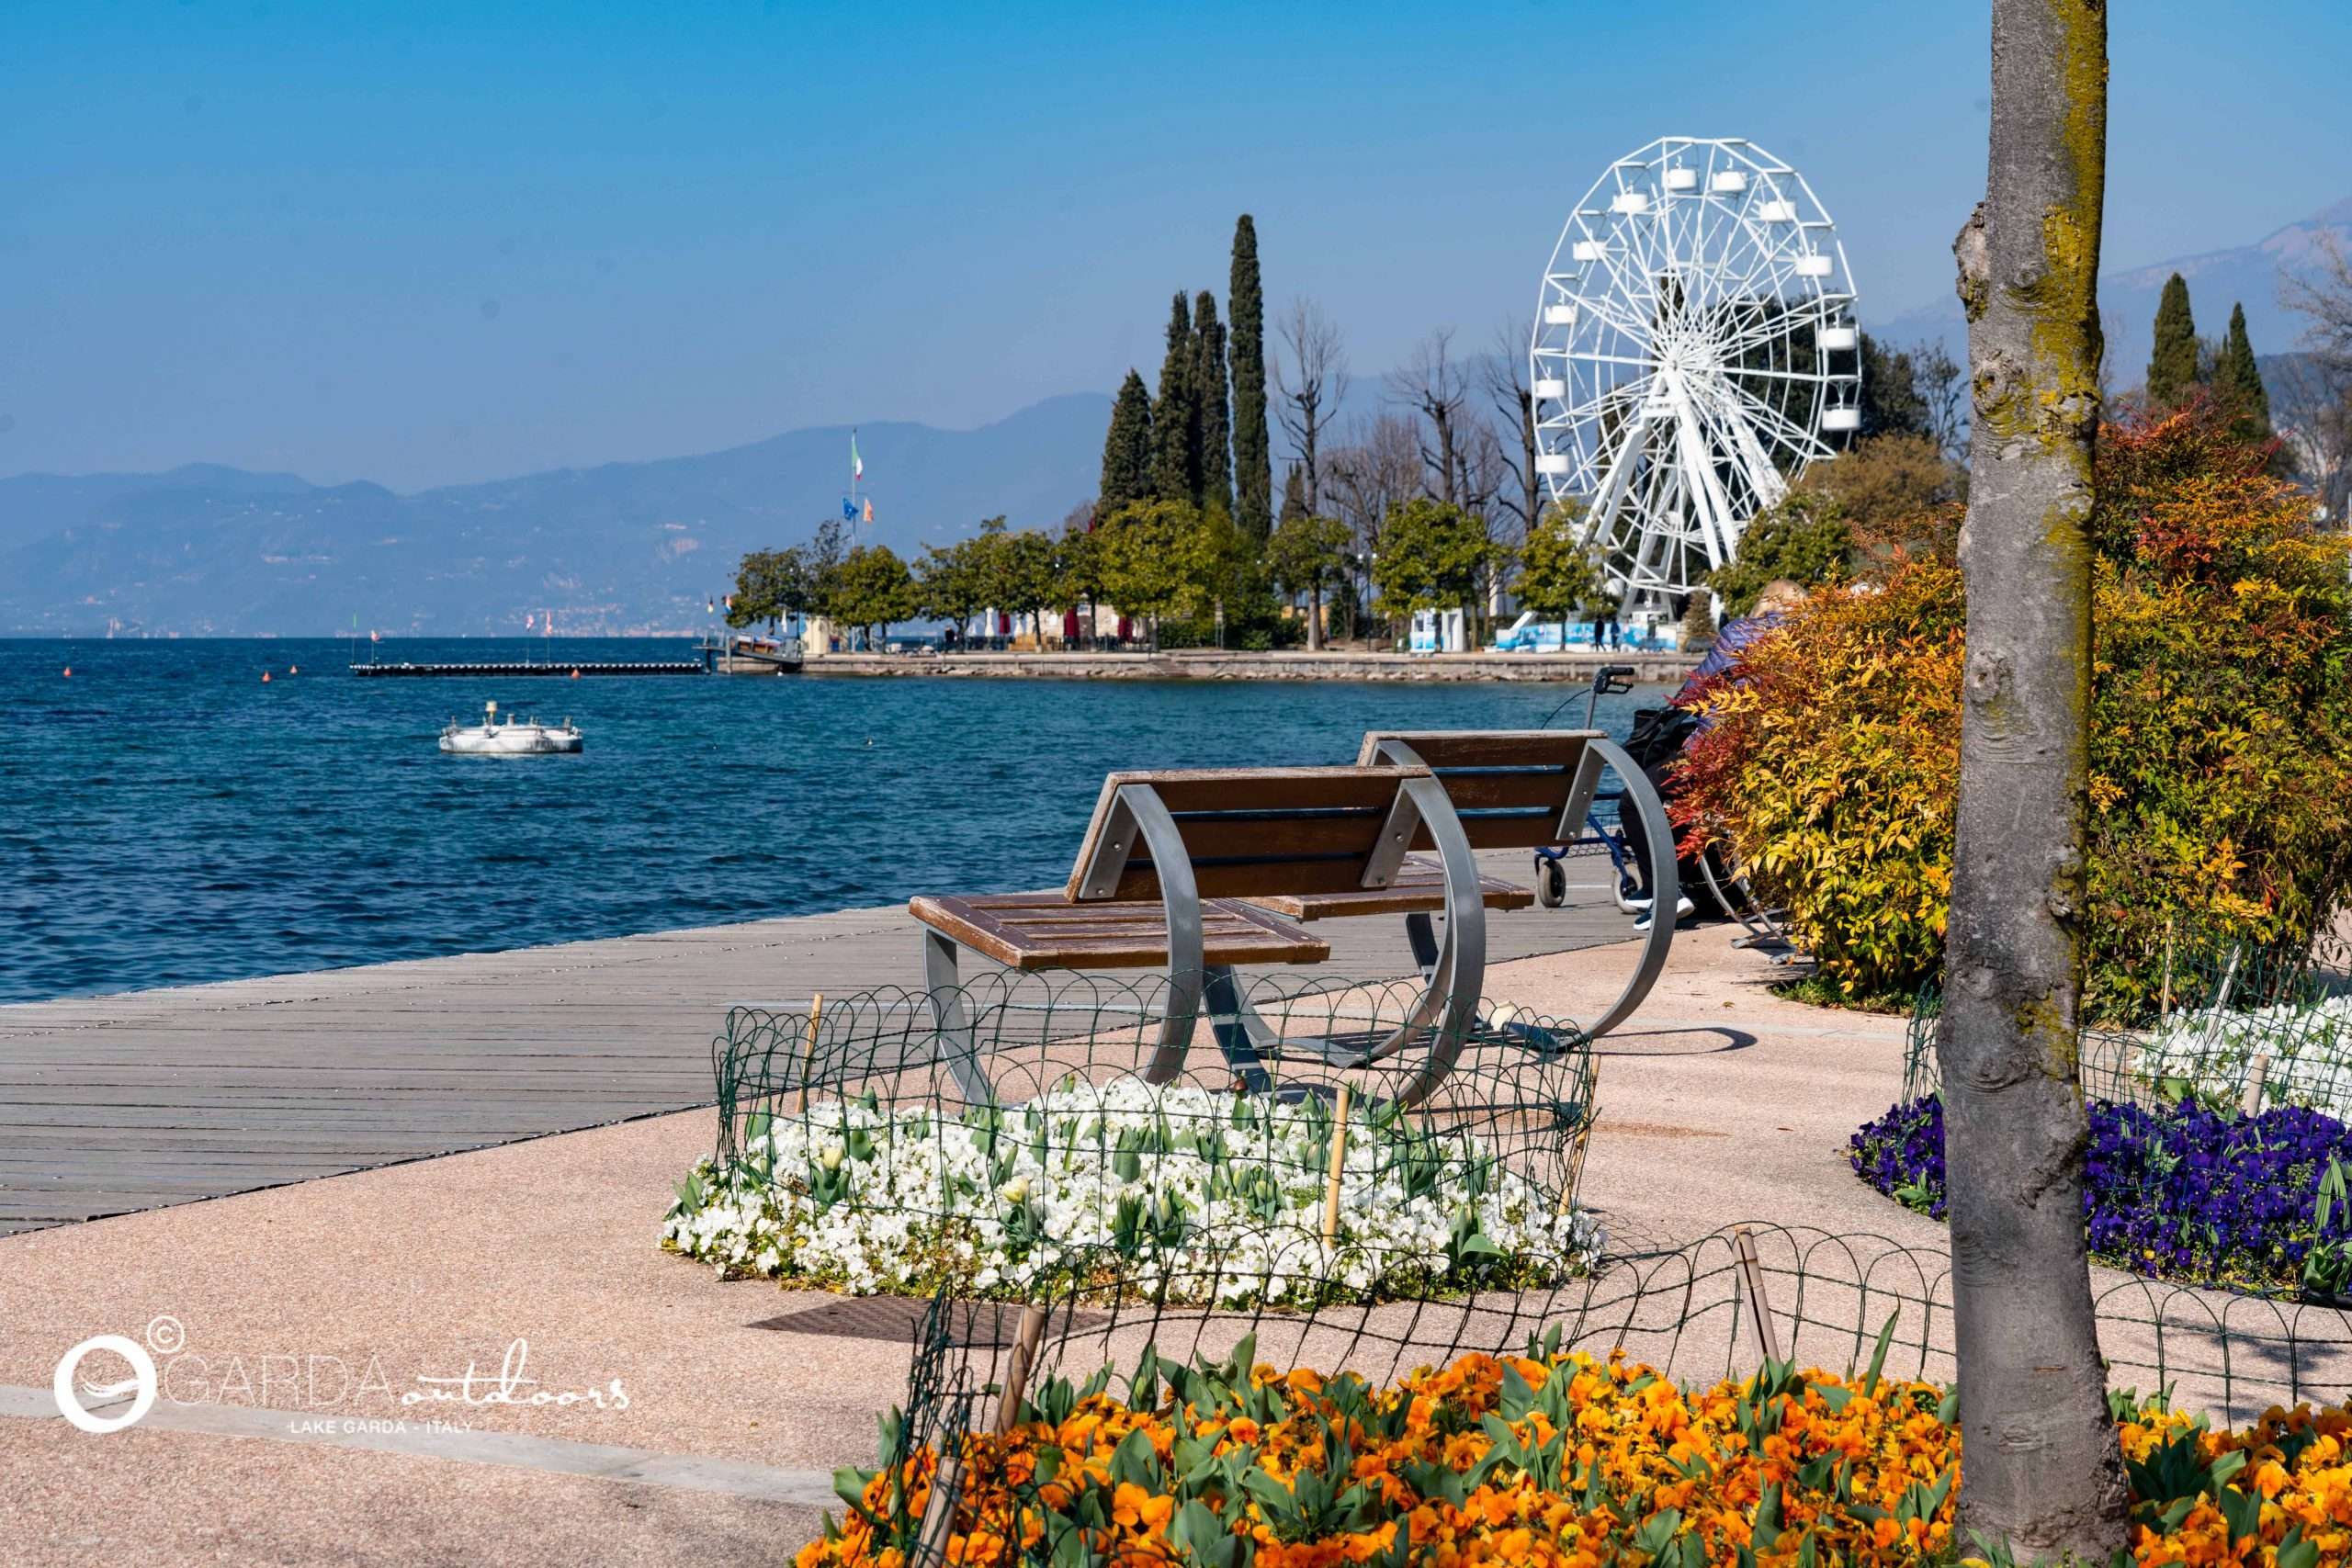 All the faces of Bardolino: what to do and see in this surprising town on Lake Garda. 